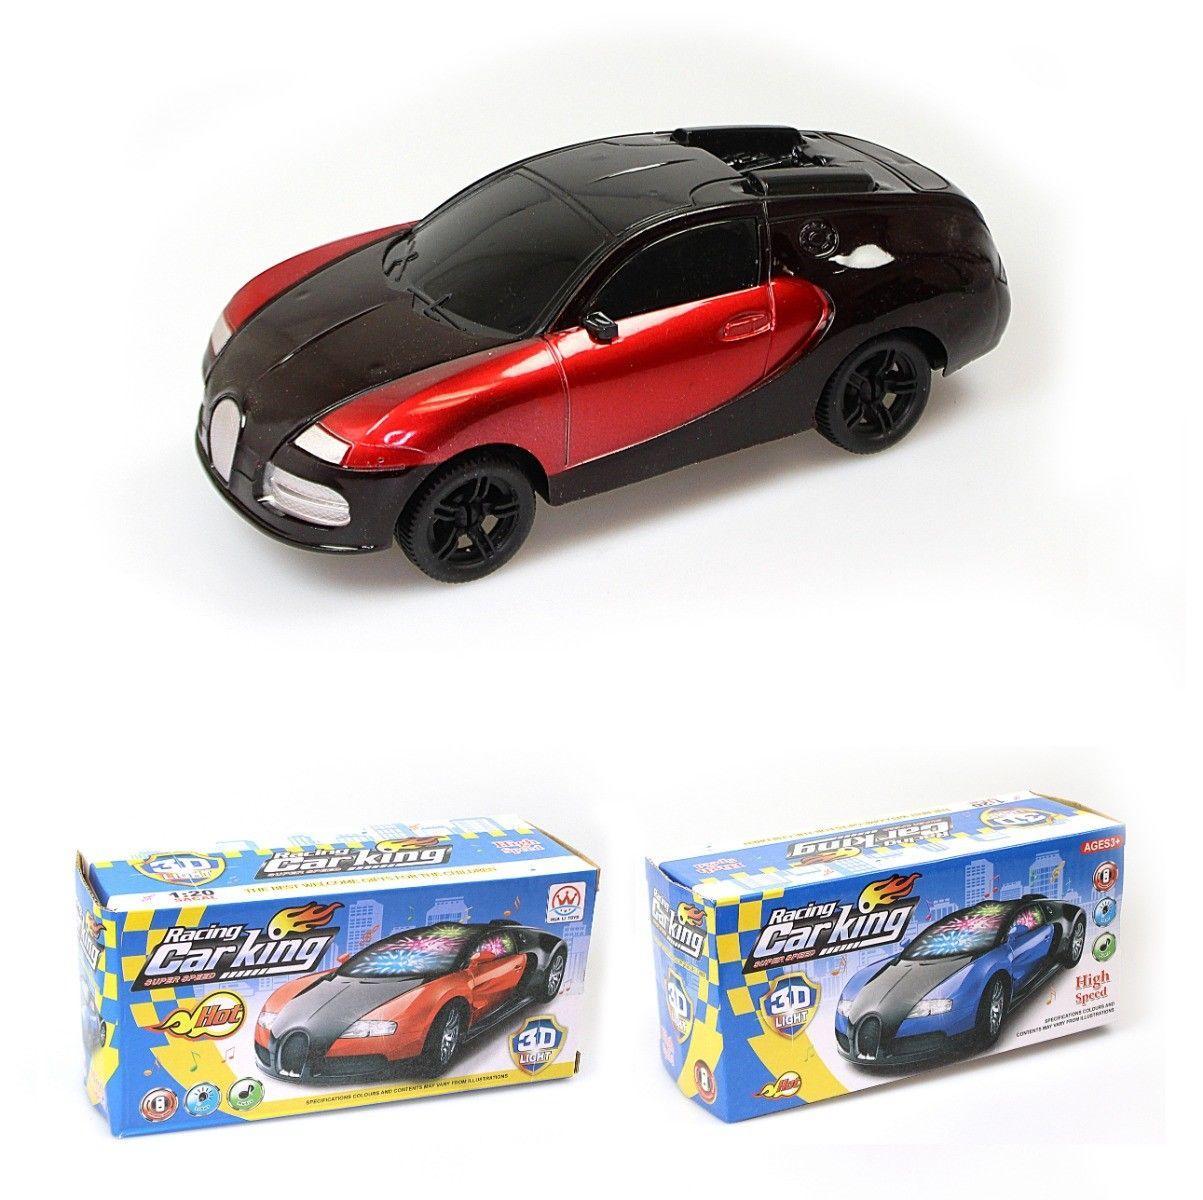 Racing Car King With 3D Lights Toy 4168 (Parcel Rate)